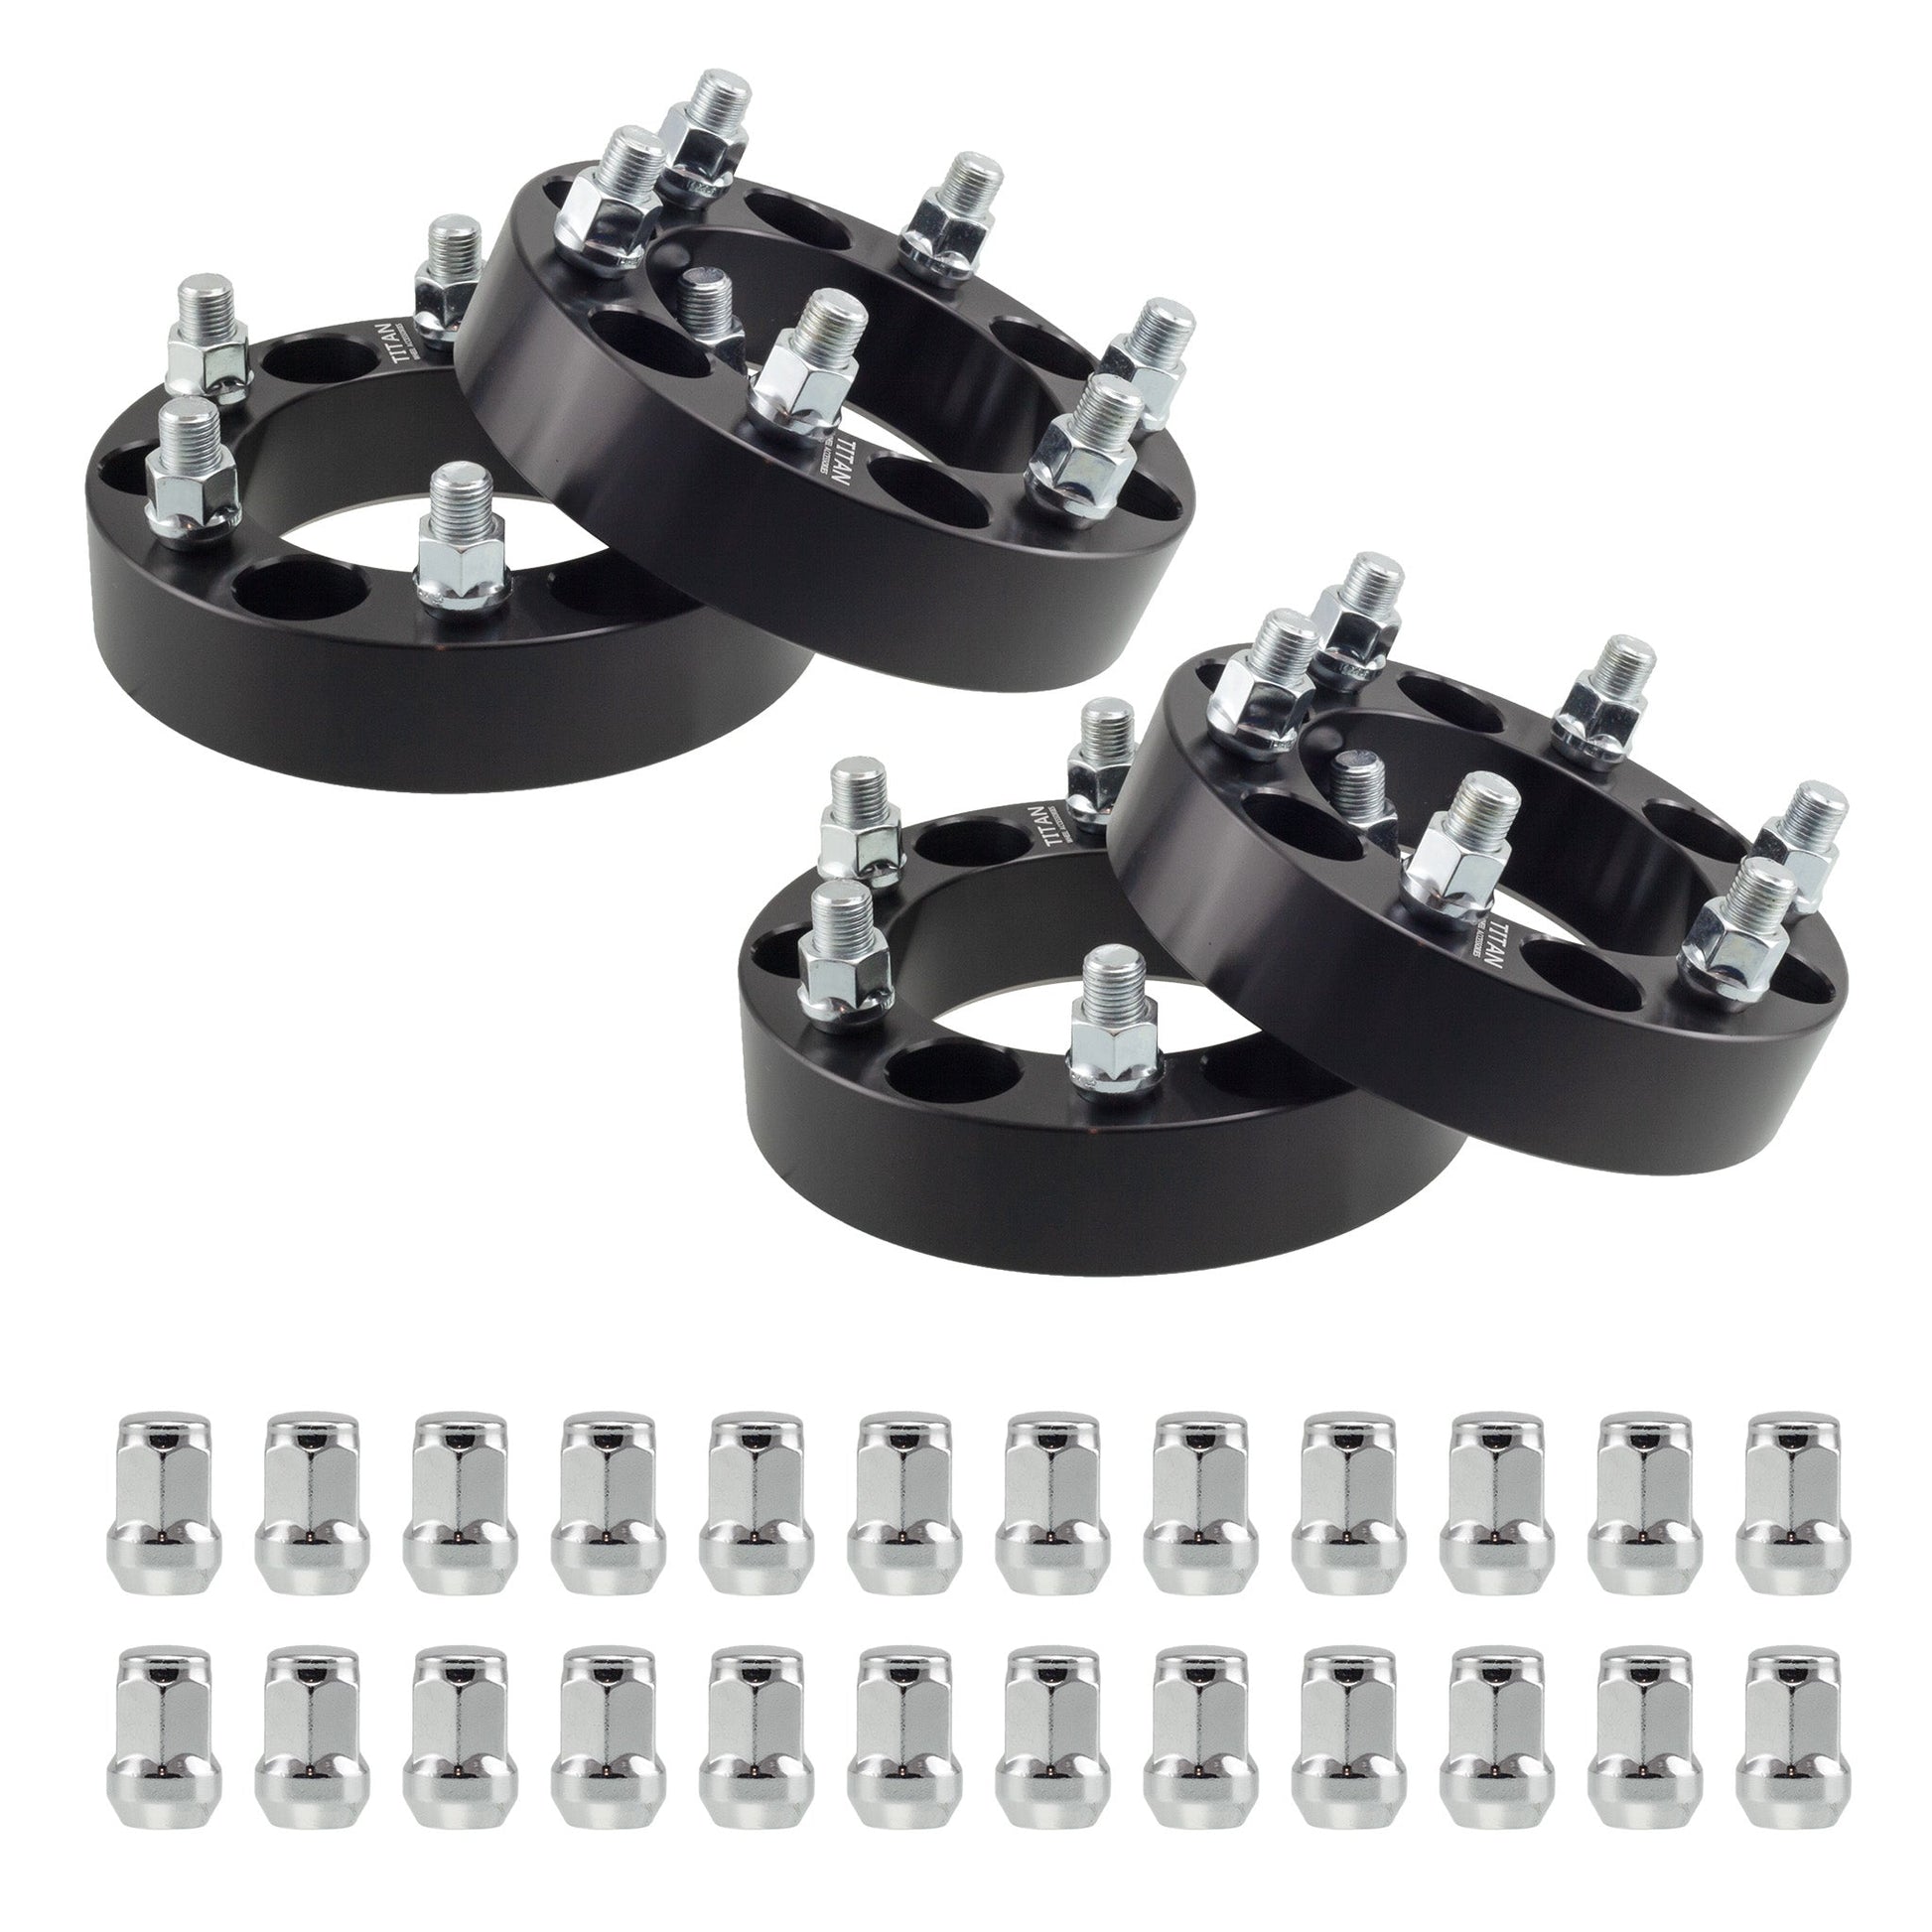 2" (50mm) Titan Wheel Spacers for GMC Canton Chevy Colorado | 6x120 | 66.9 Hubcentric |14x1.5 Studs | Titan Wheel Accessories